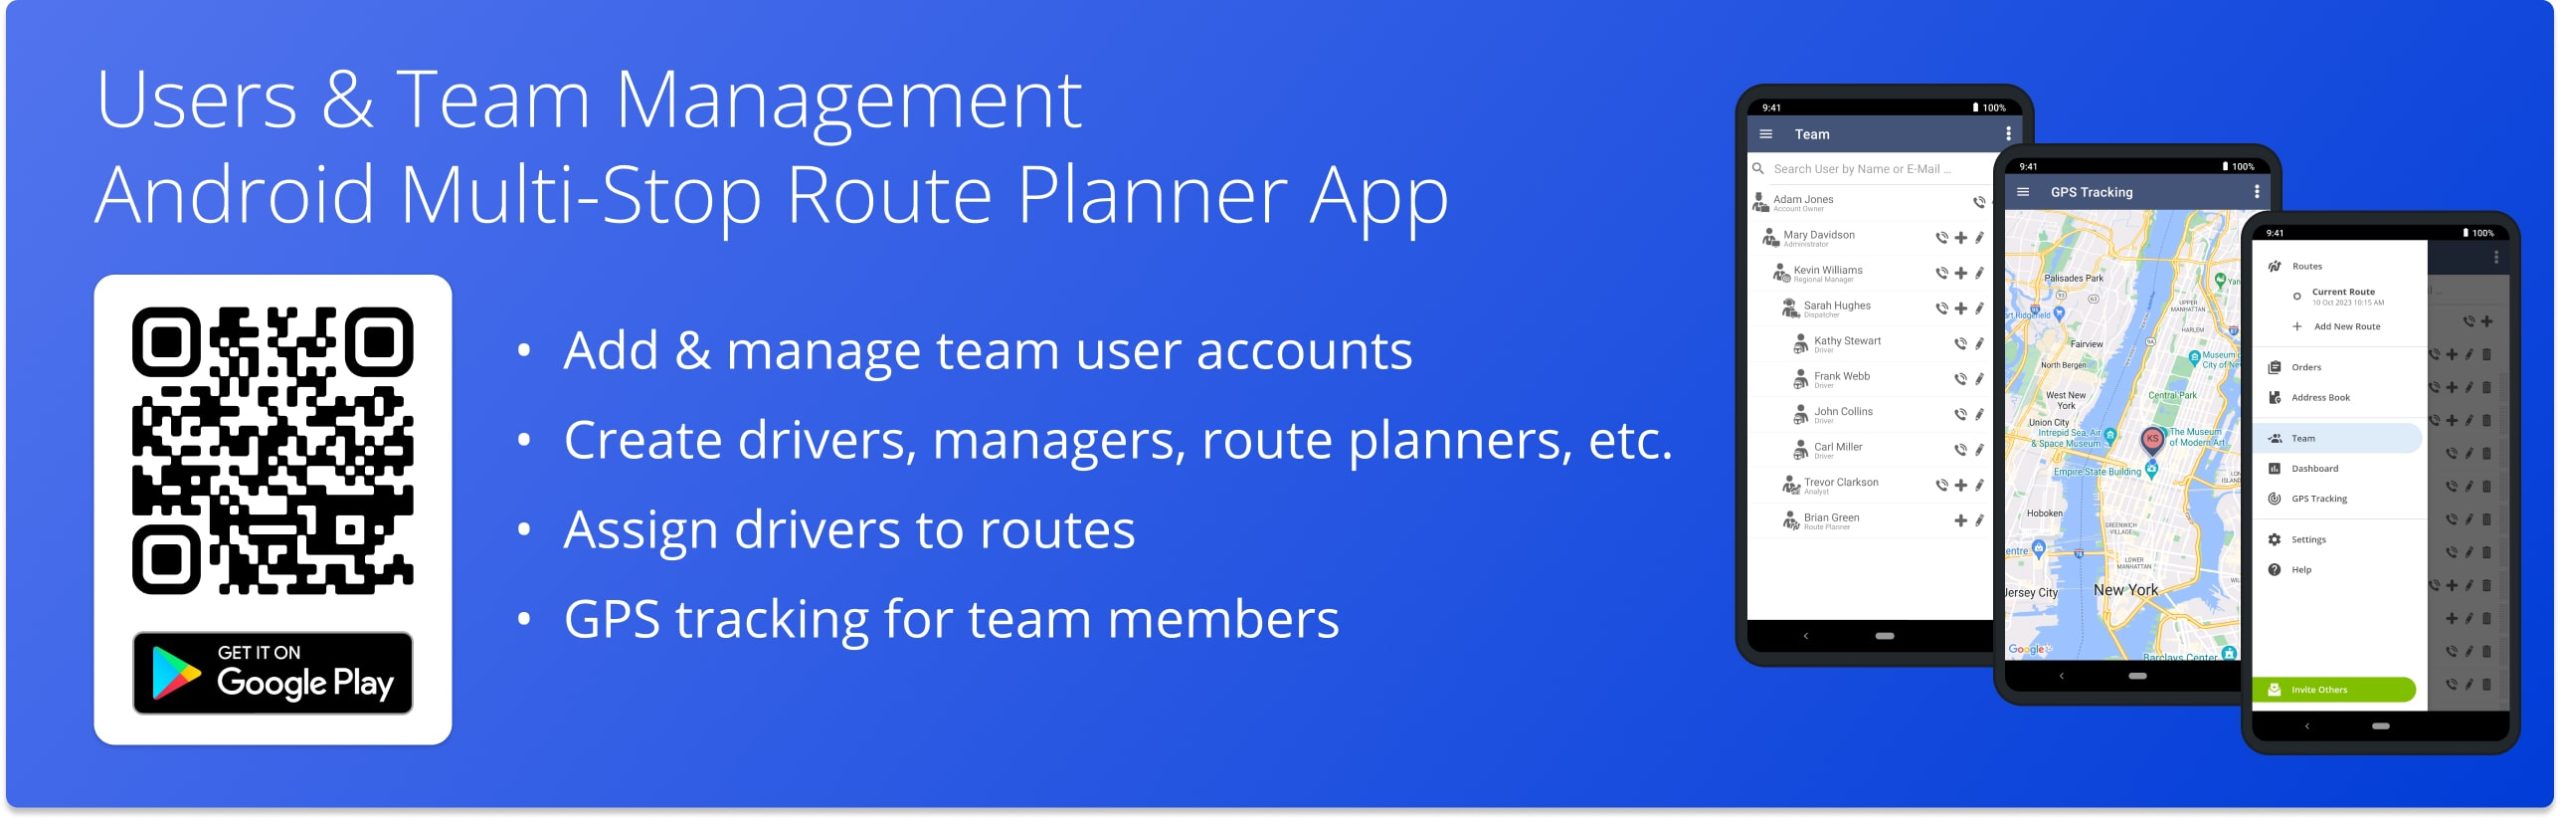 Add drivers, managers, dispatchers, and other team members, assign users to routes, and use GPS team tracking on Route4Me's Android Route Planner app.